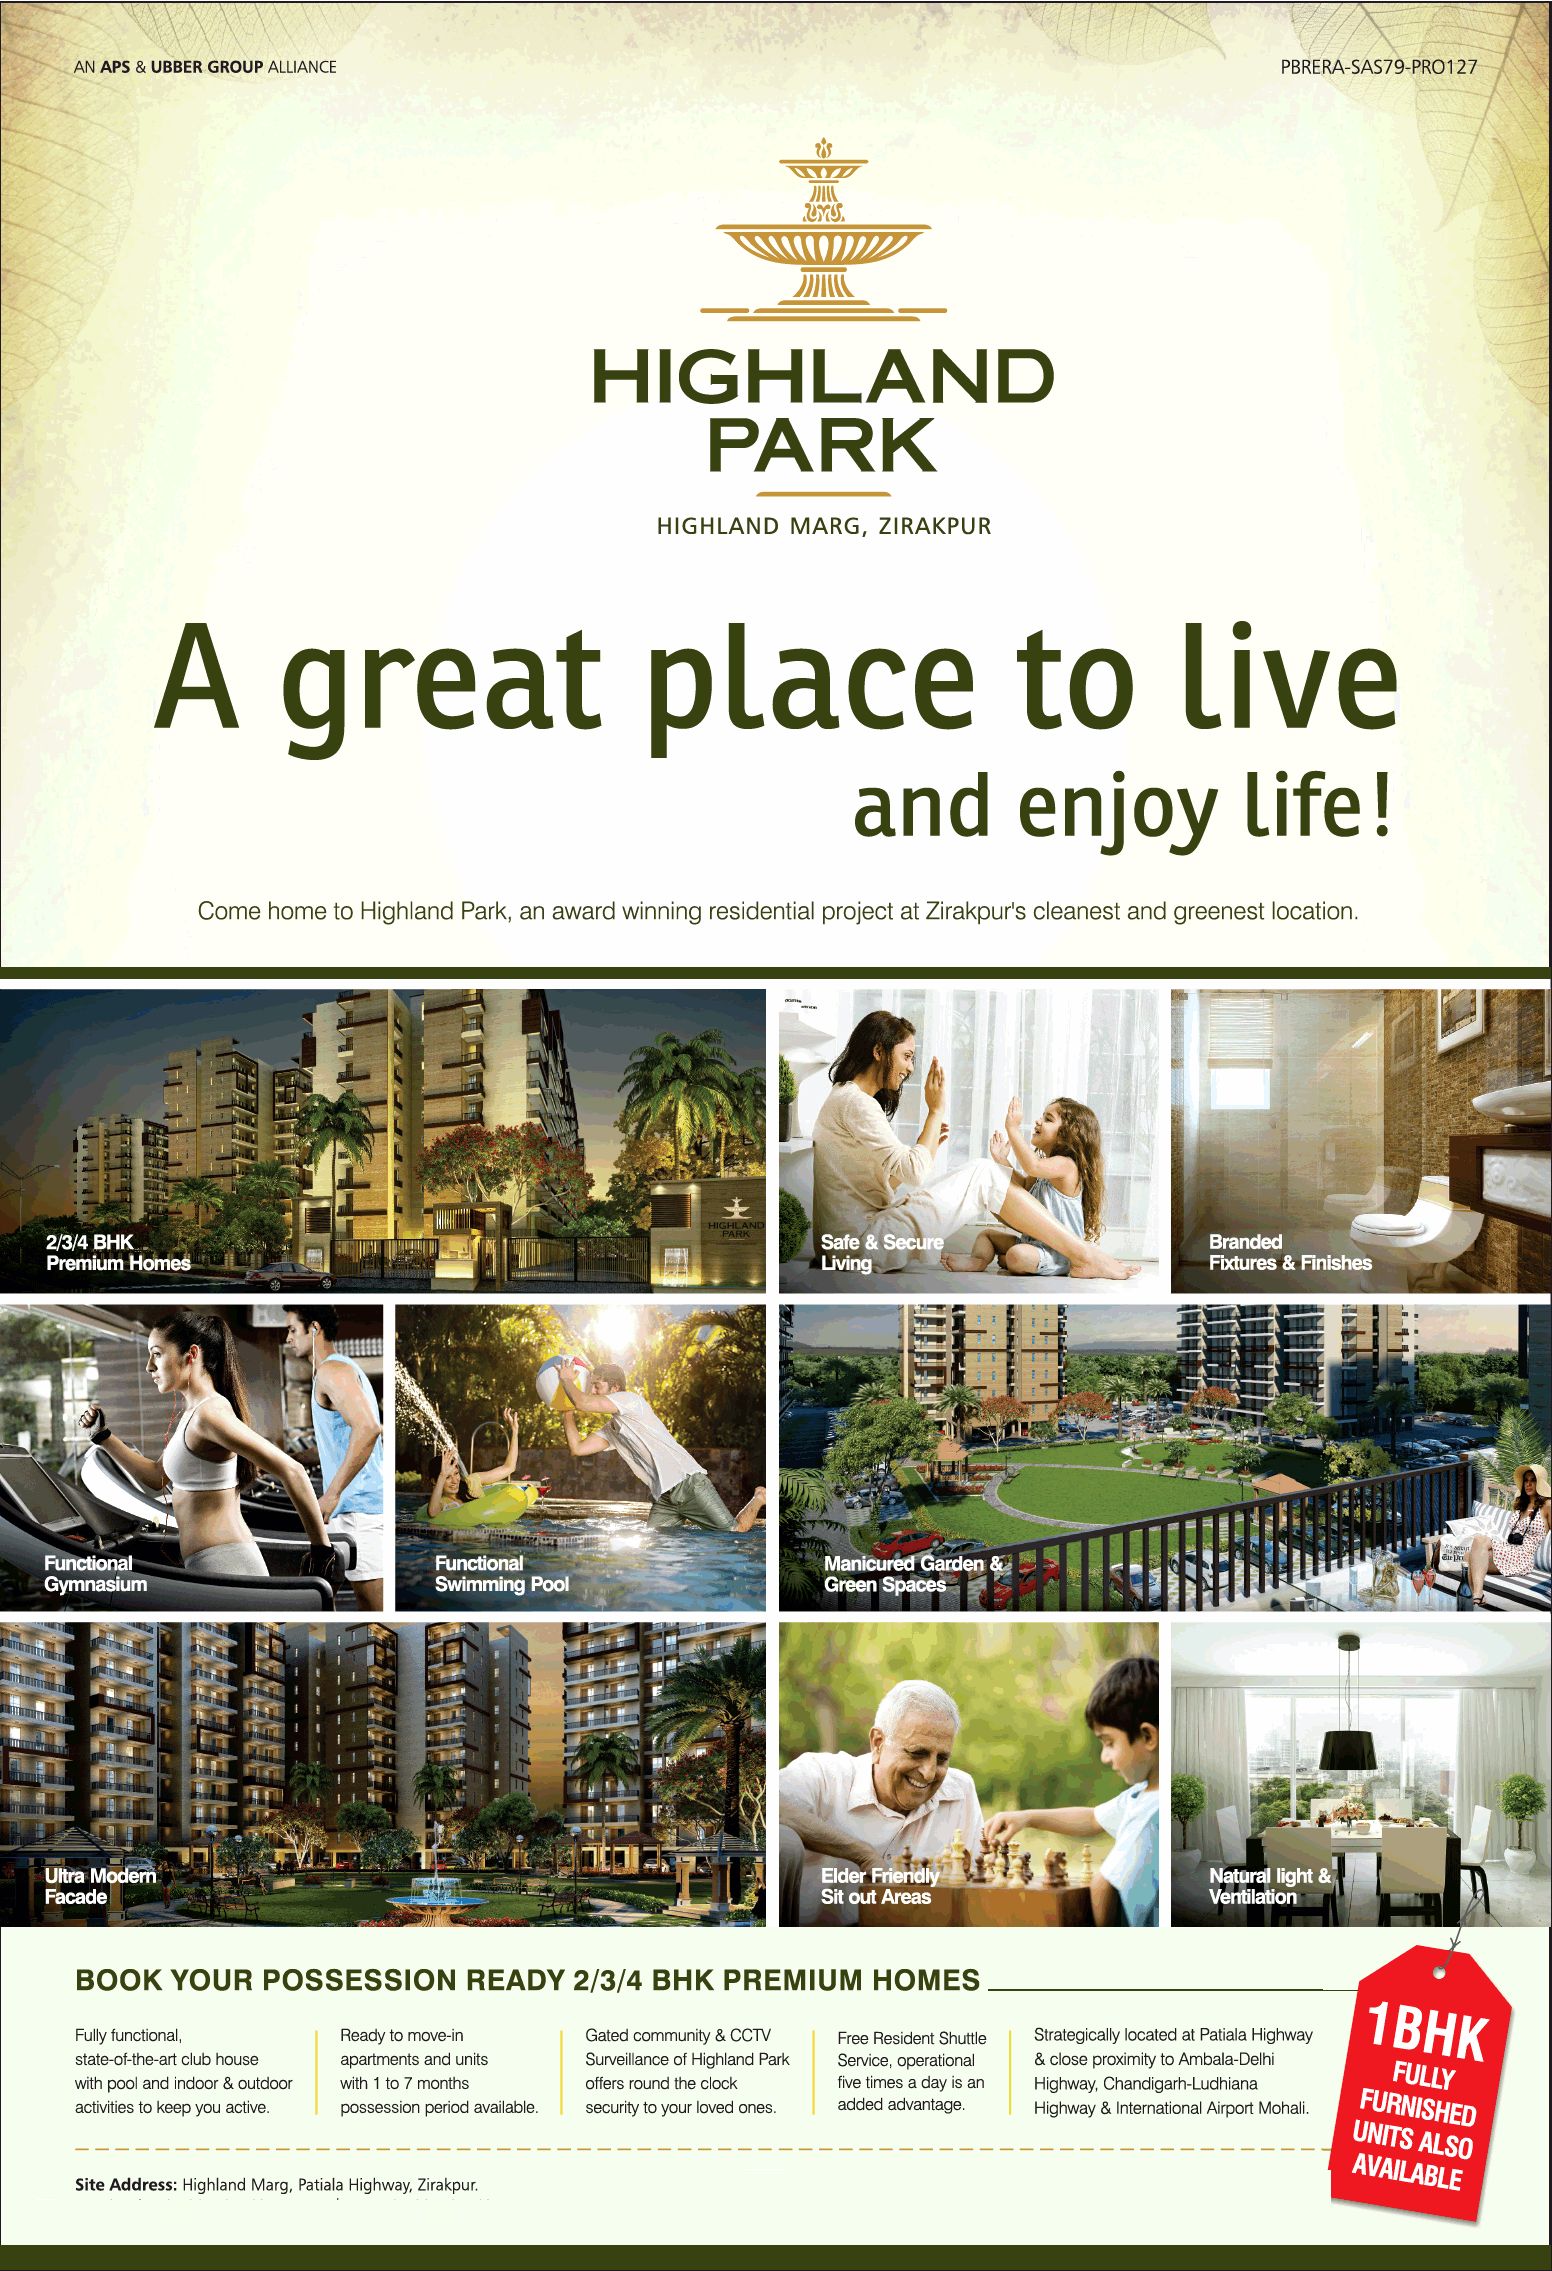 Book your possession ready 2/3/4 BHK premium homes at Highland Park, Chandigarh Update